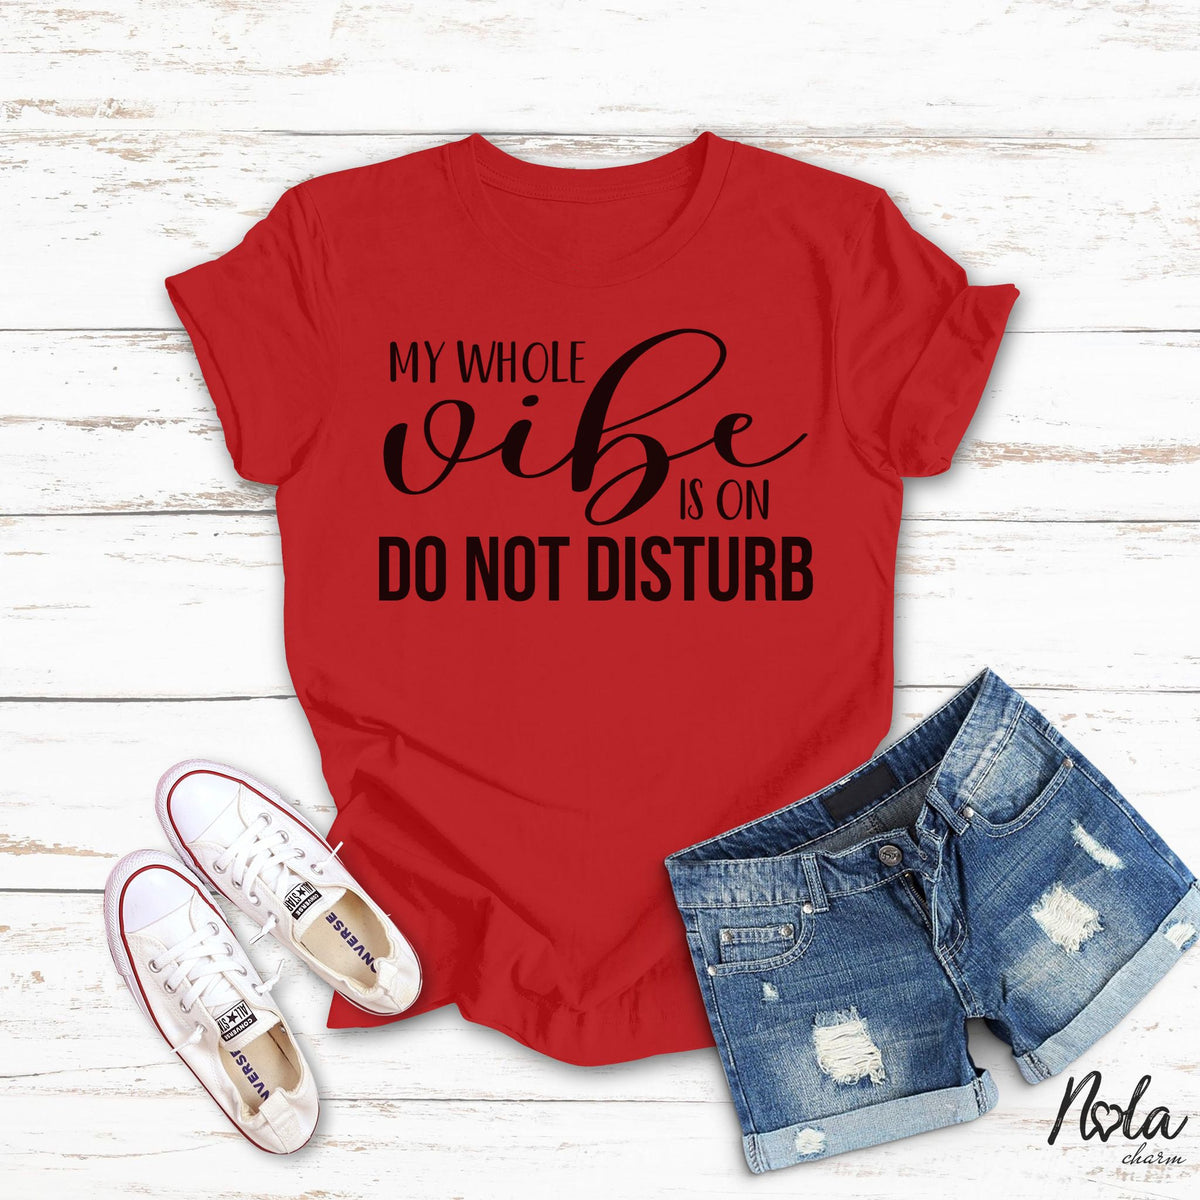 My Whole Vibe Is On Do Not Disturb - Nola Charm